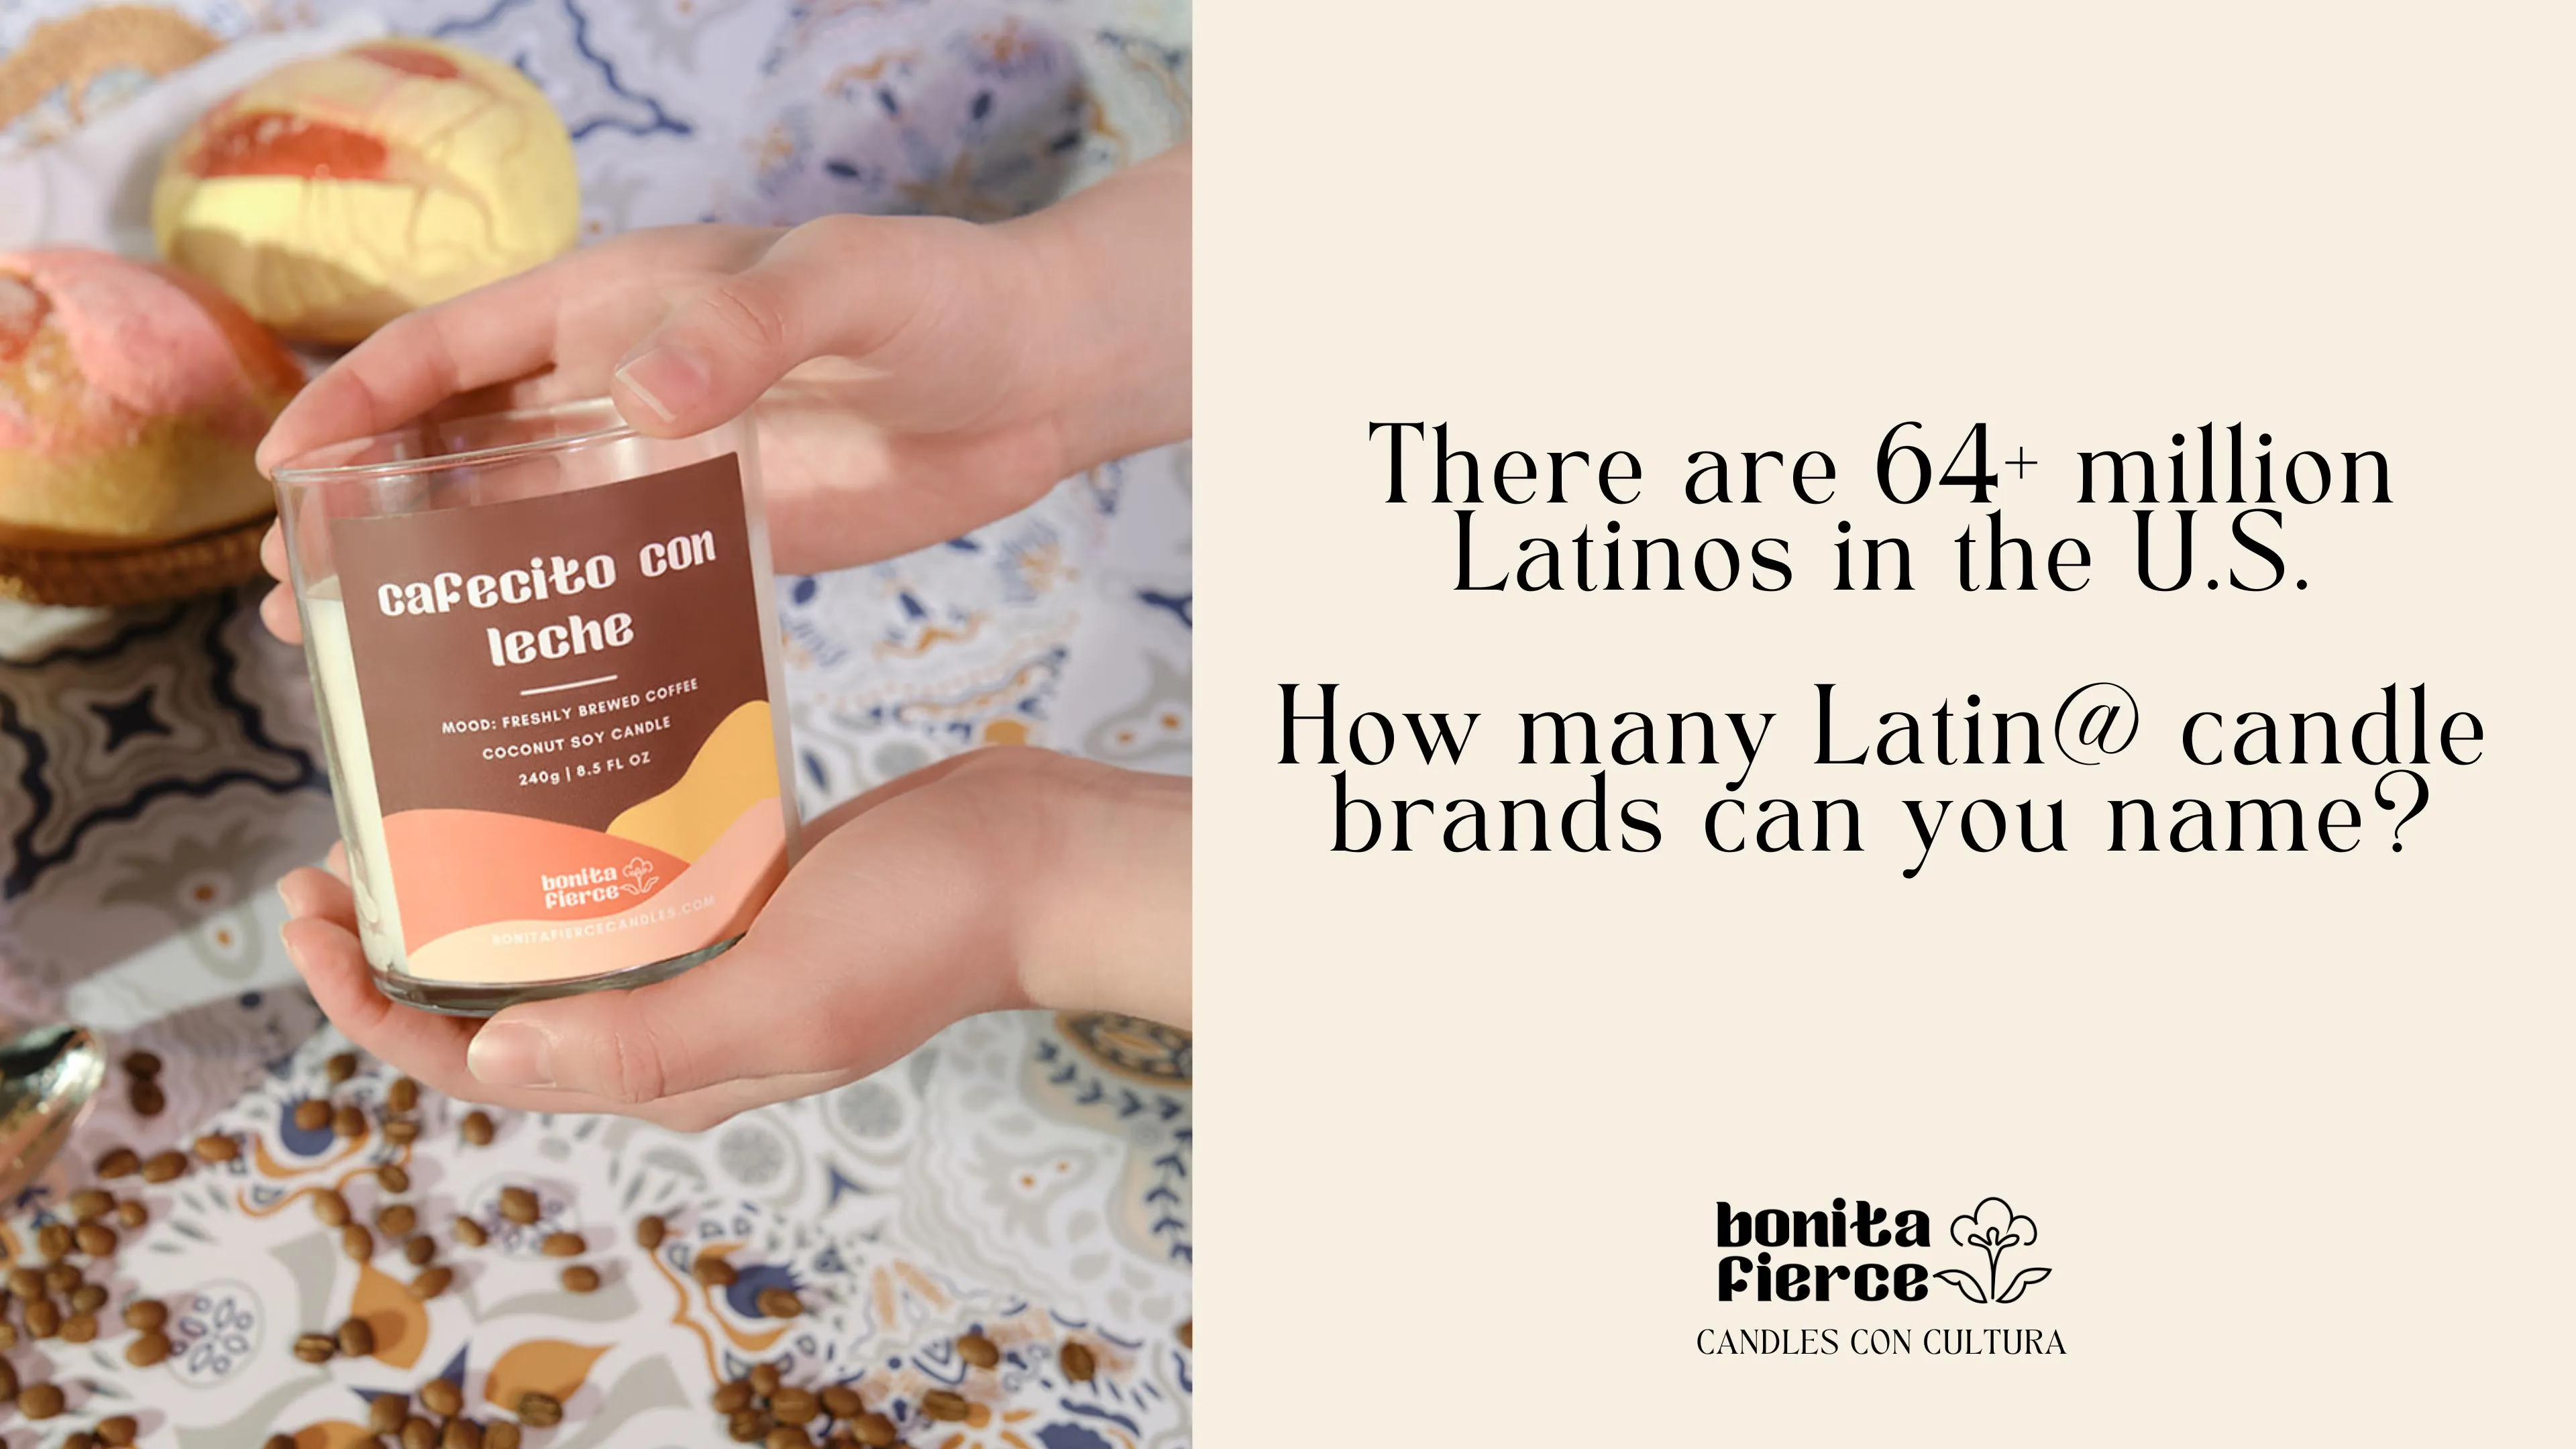 There are 64+ million Latinos in the U.S. How many Latin candle brands can you name?